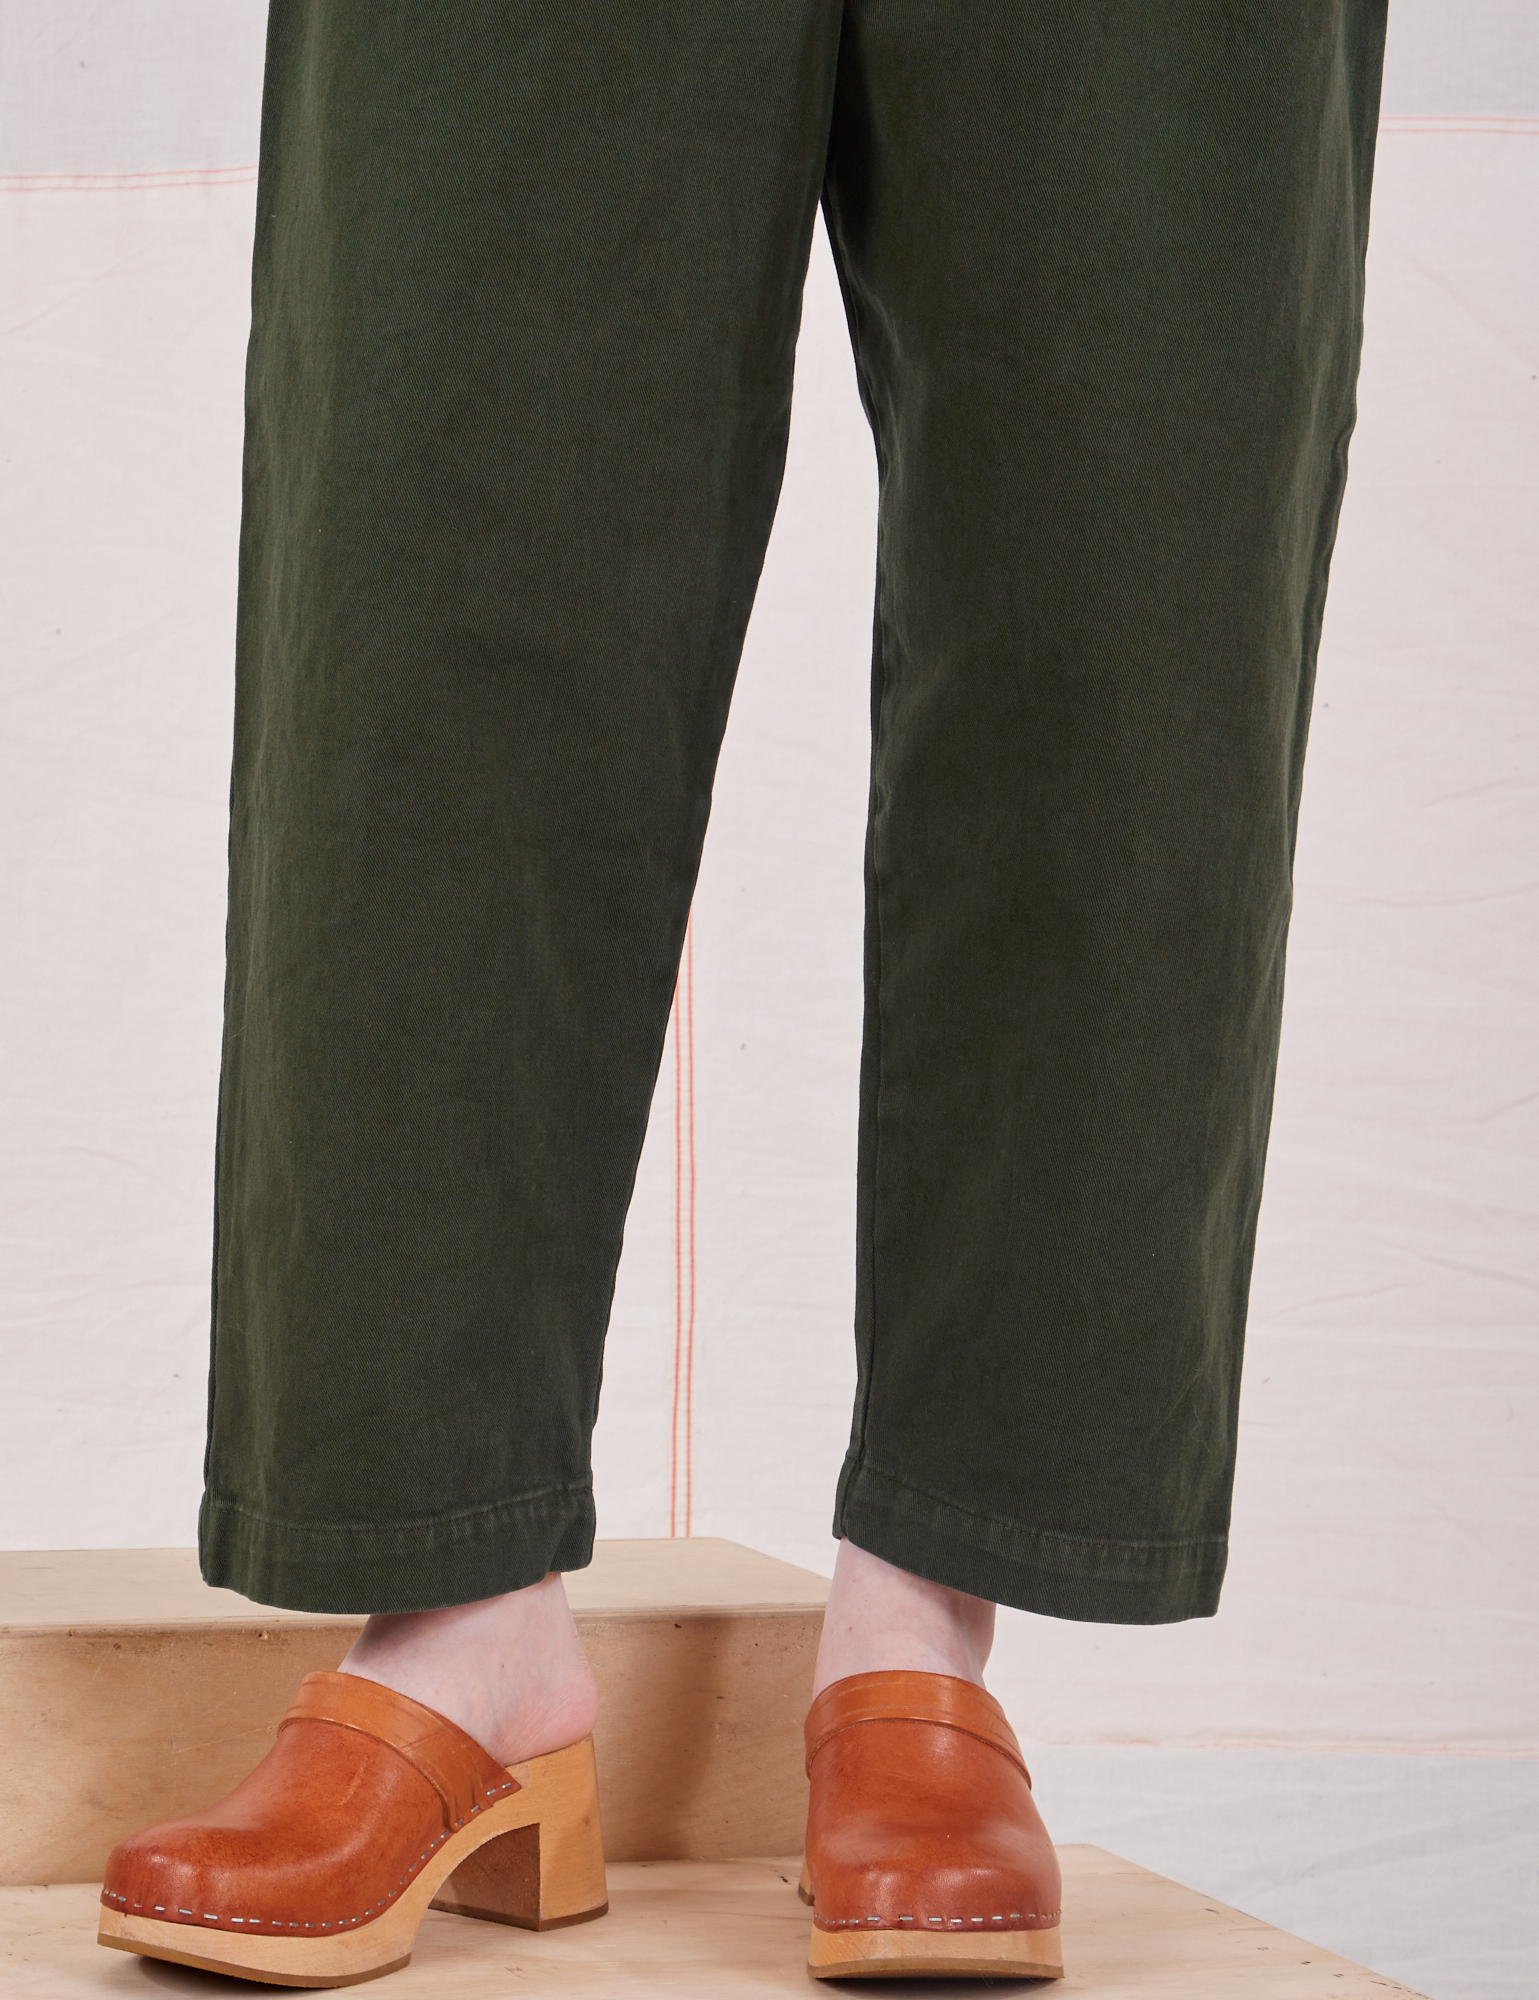 Heavyweight Trousers in Swamp Green pant leg close up on Hana